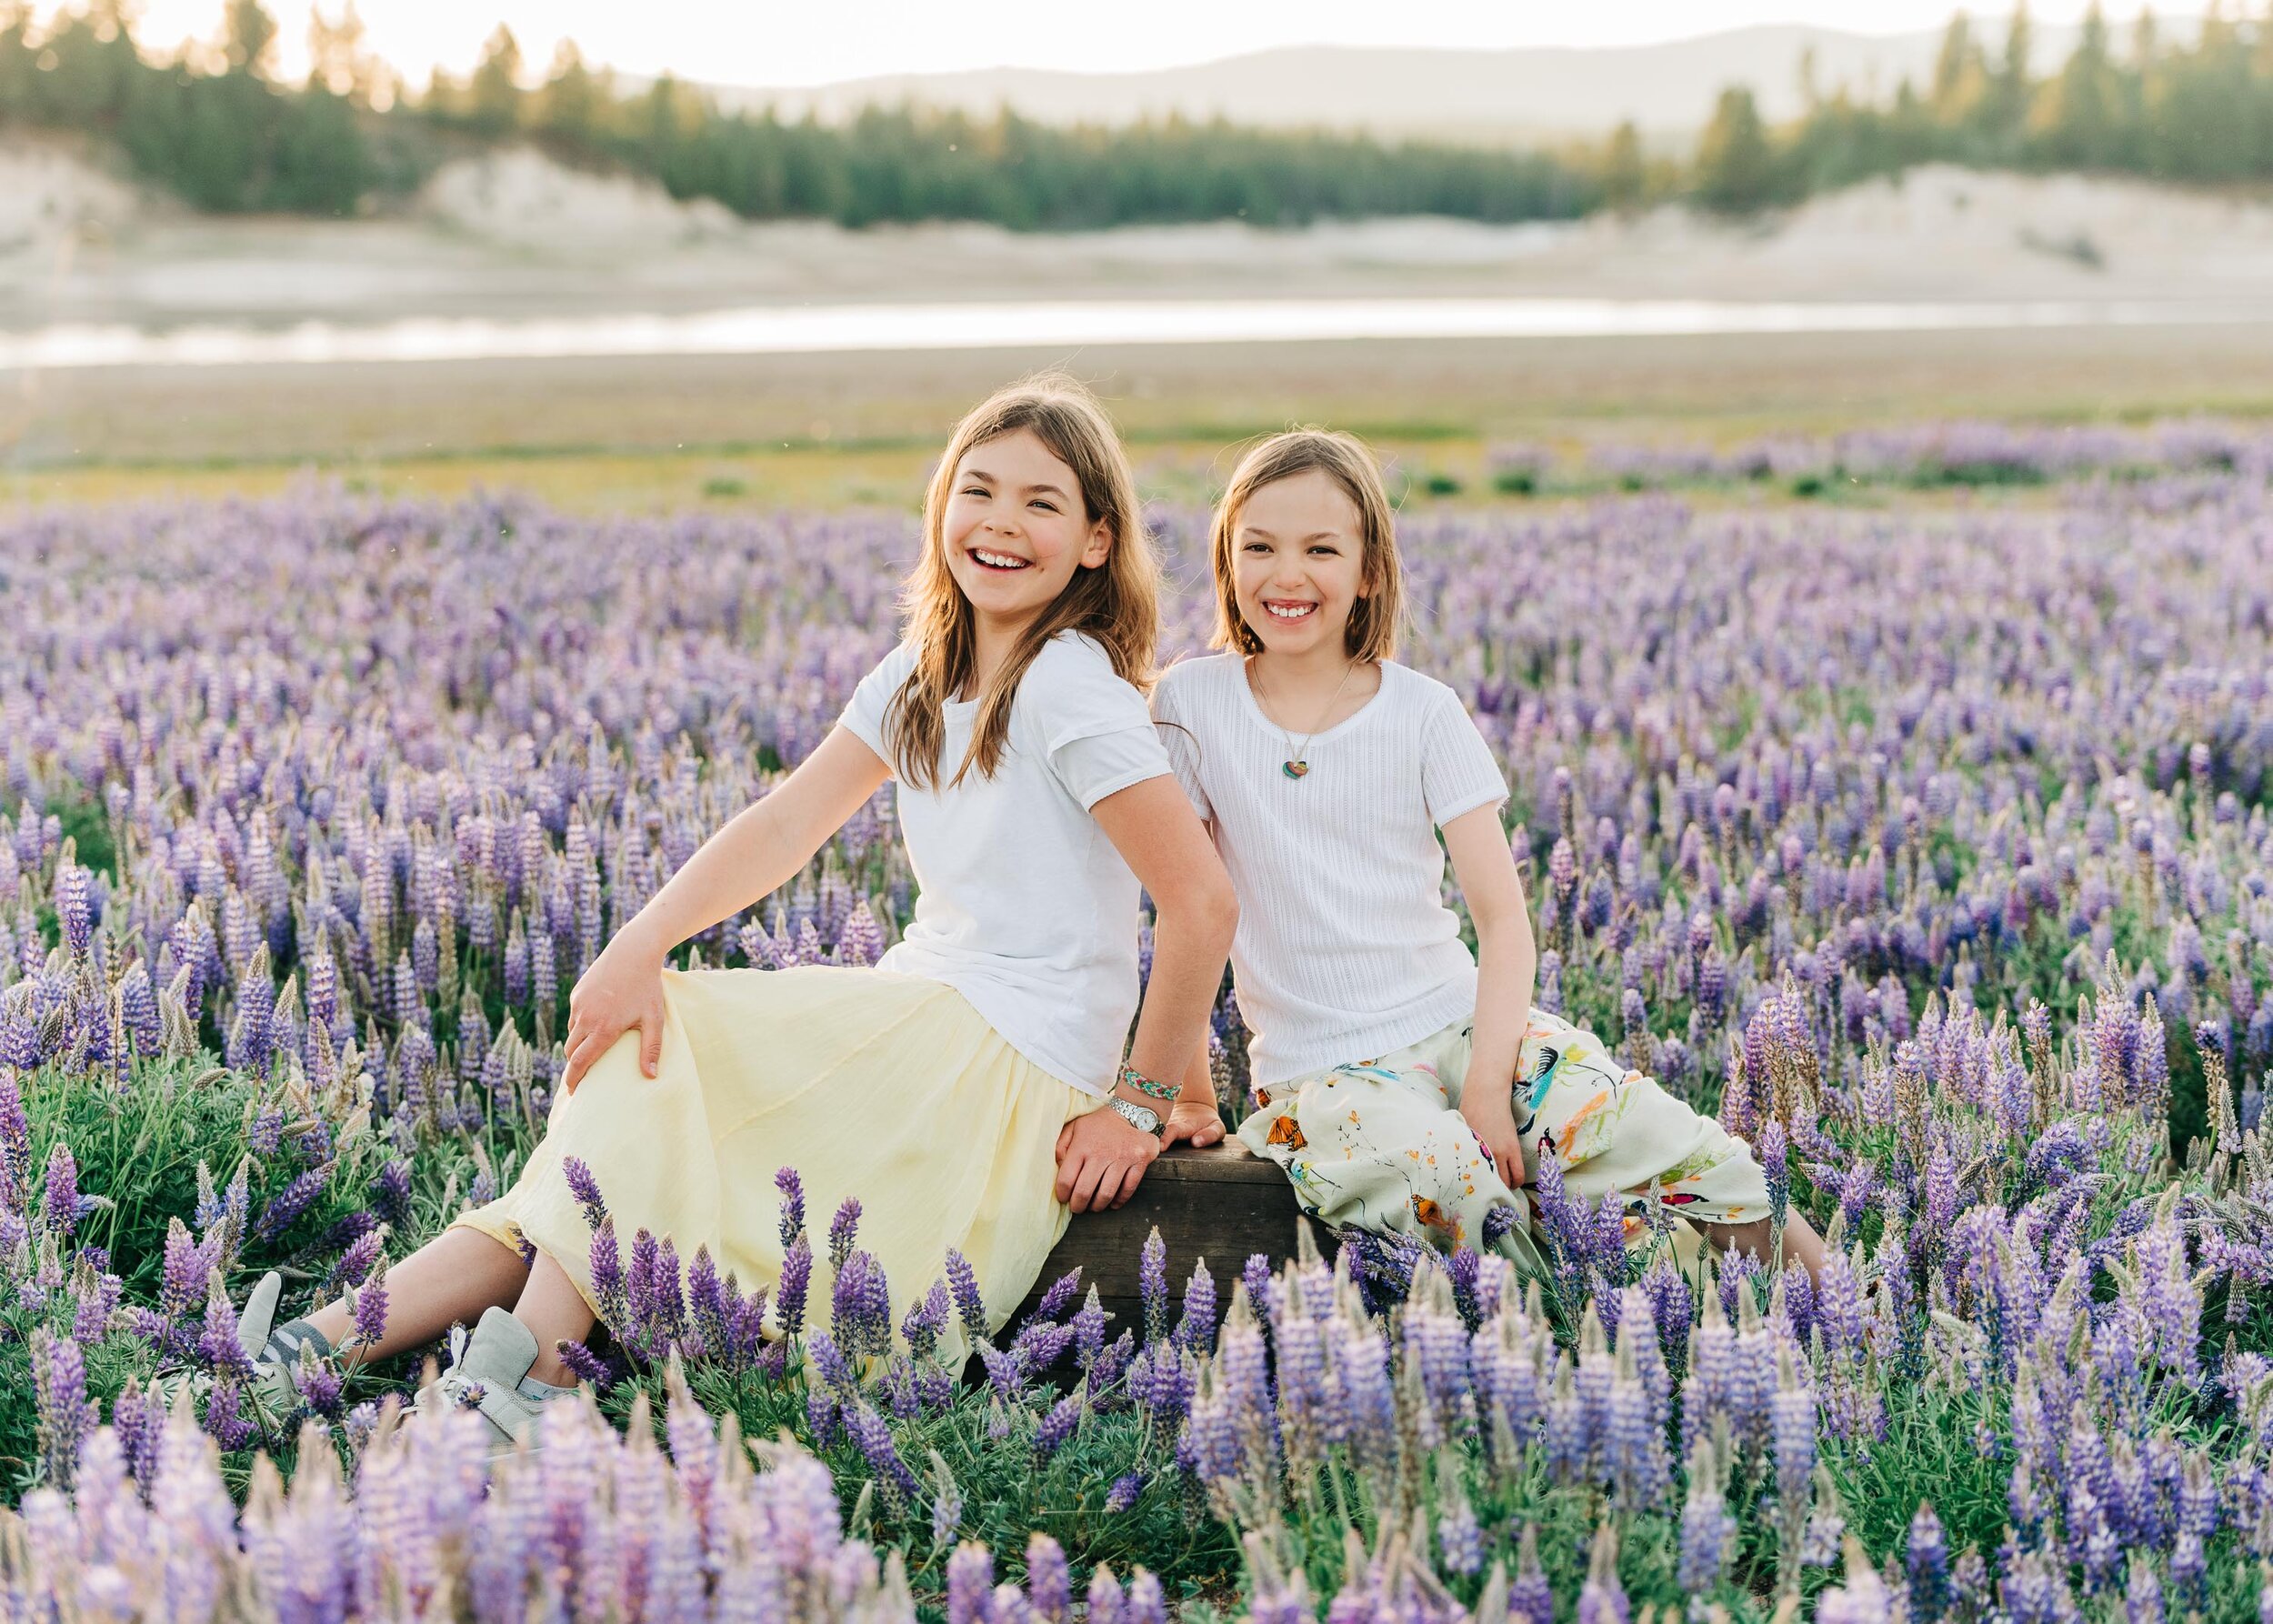 Lupine Wildflowers in Truckee, Product Branding Photography by Kelli Price Photography